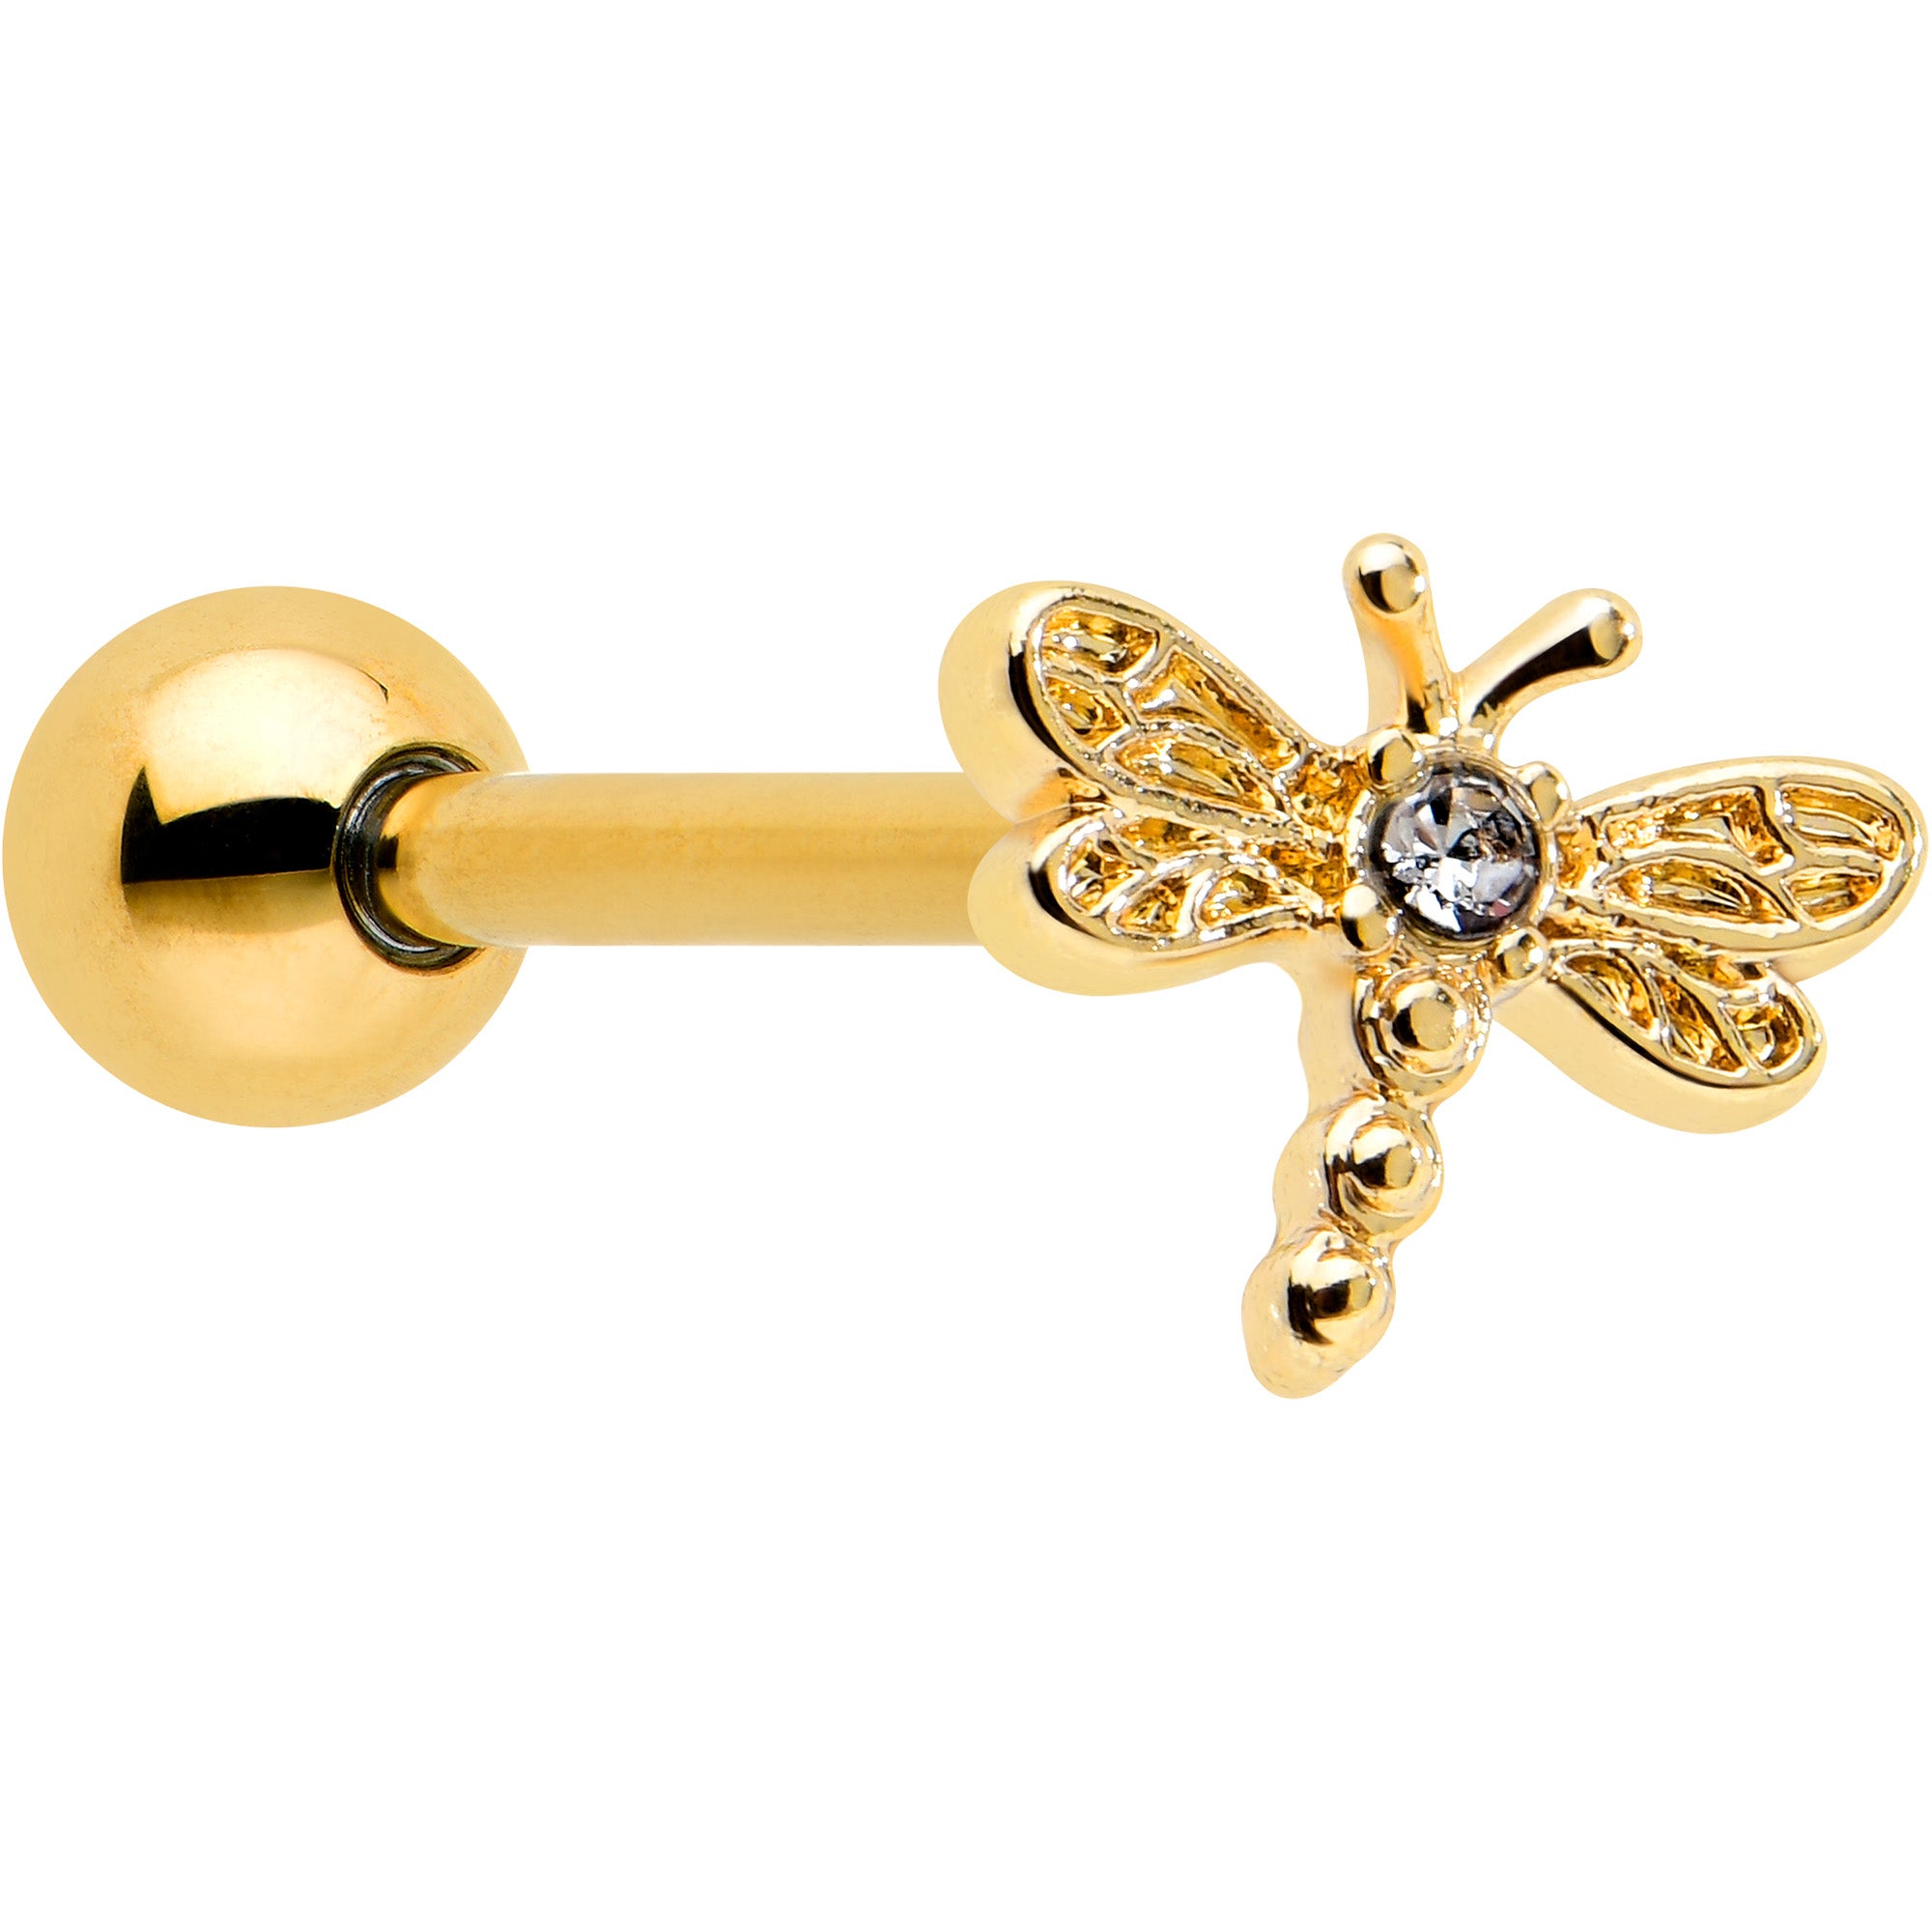 Clear Gem Gold Tone Flying Dragonfly Barbell Tongue Ring